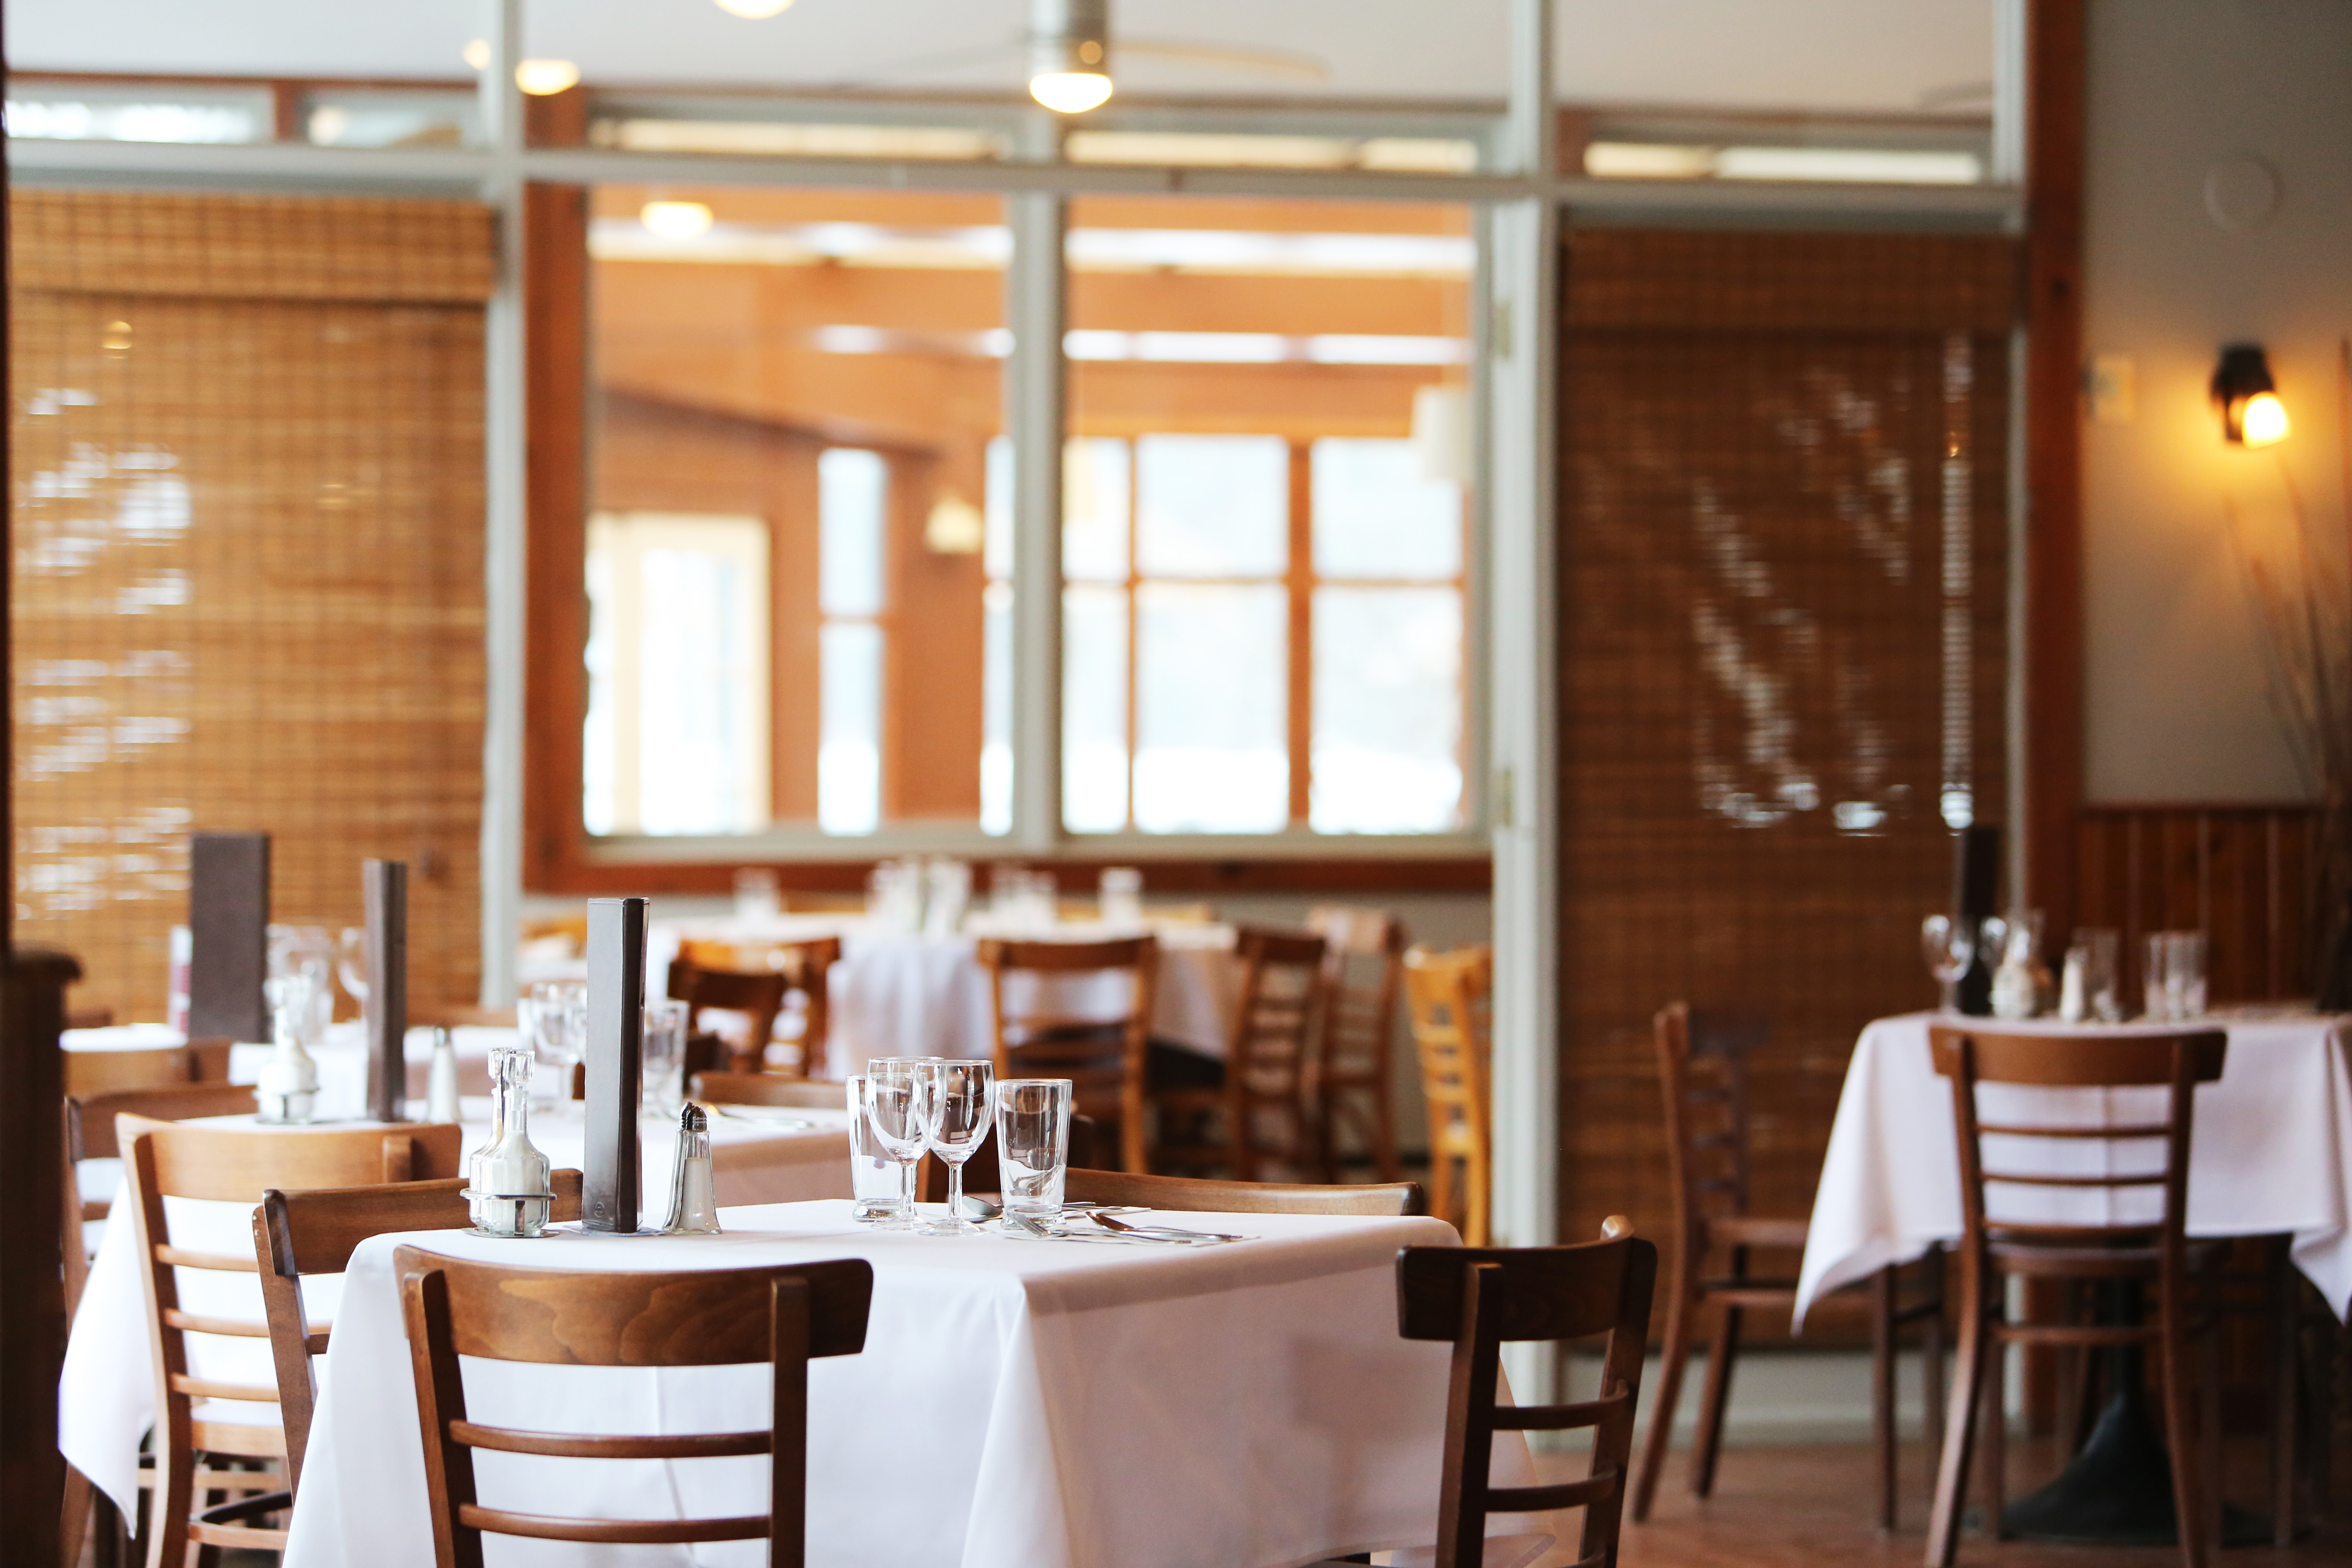 Why You Should Use Table Linens in Your Restaurant